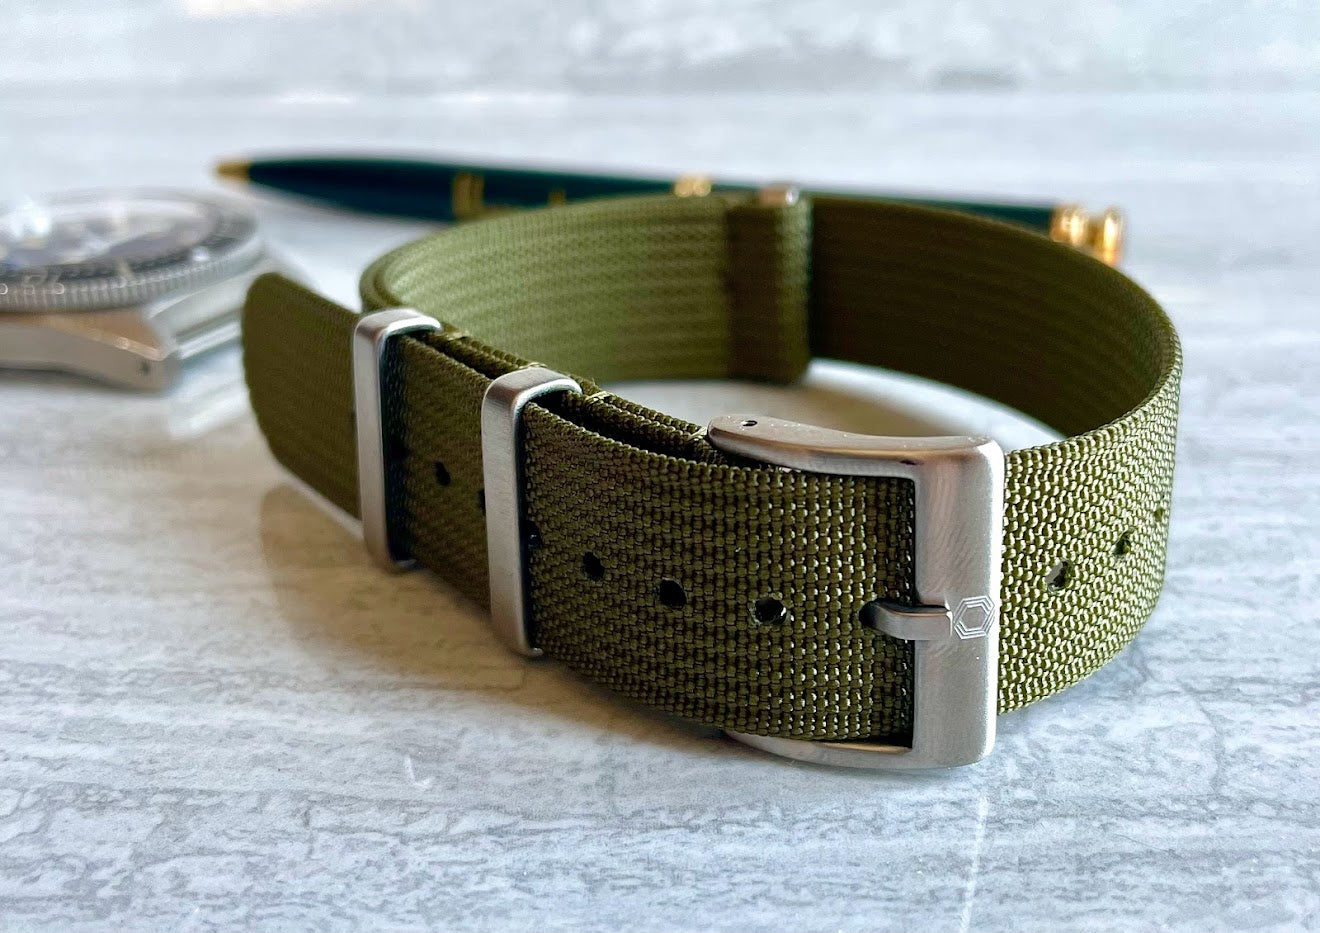 The 'Dartmoor' - Green adjustable watch strap made of ribbed nylon